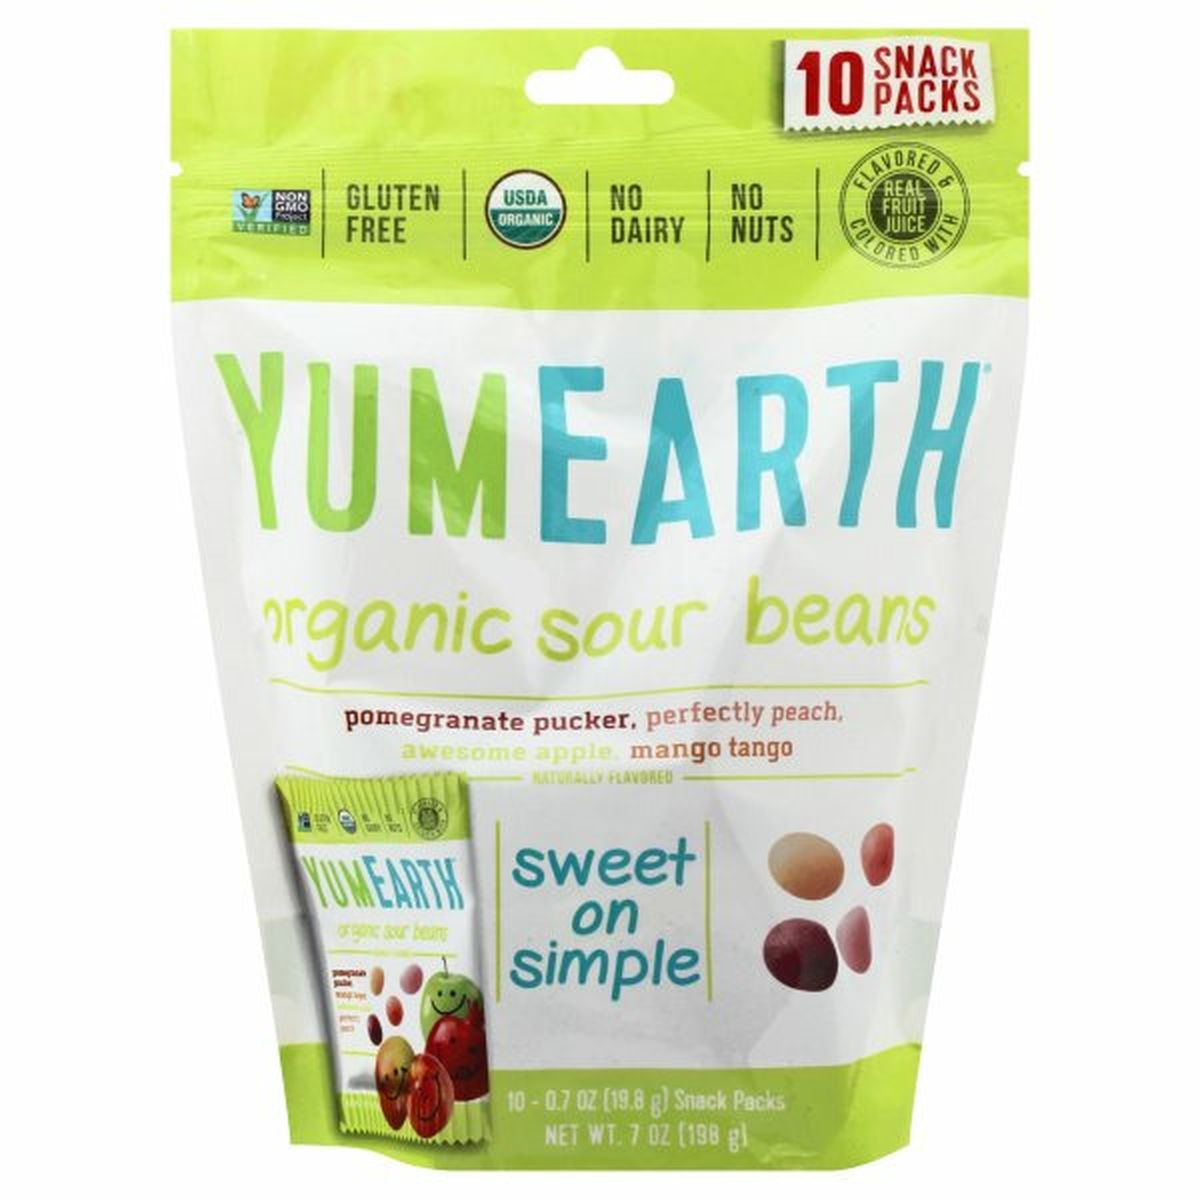 Calories in YumEarth Sour Beans, Organic, Assorted, 10 Snack Packs